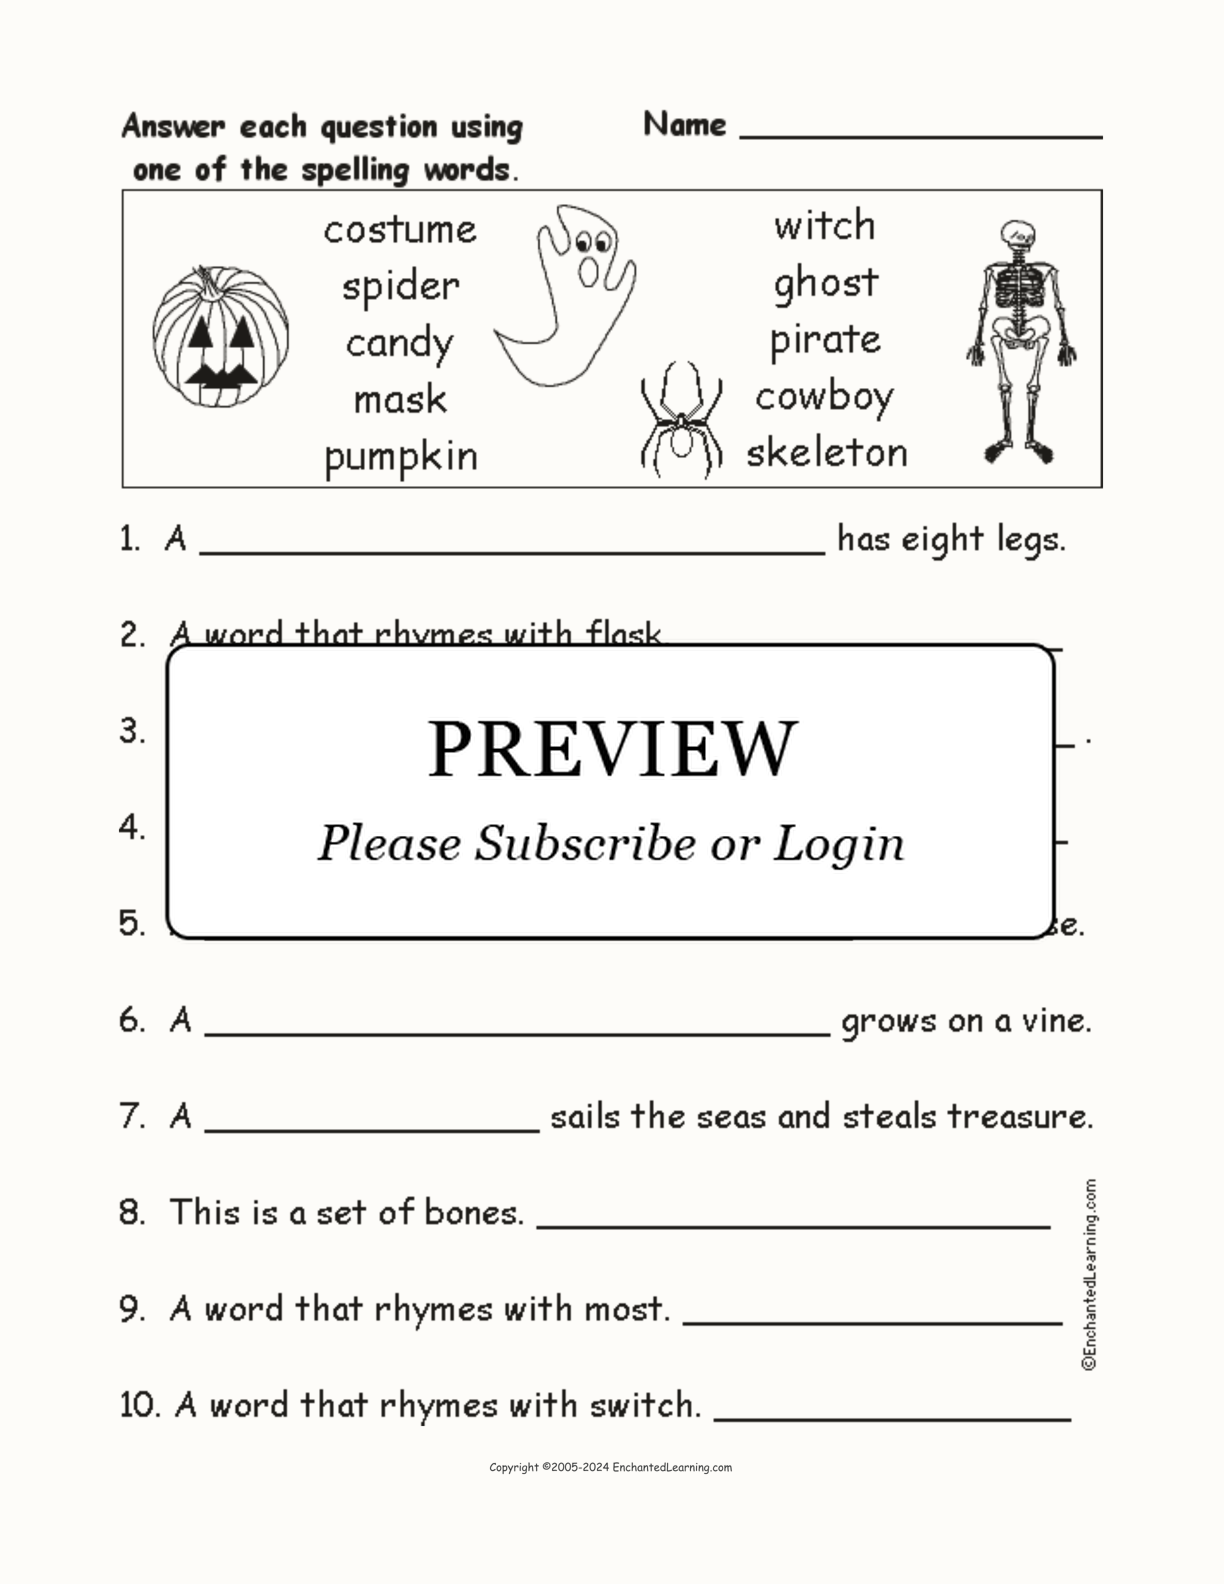 Halloween Spelling Word Questions interactive worksheet page 1